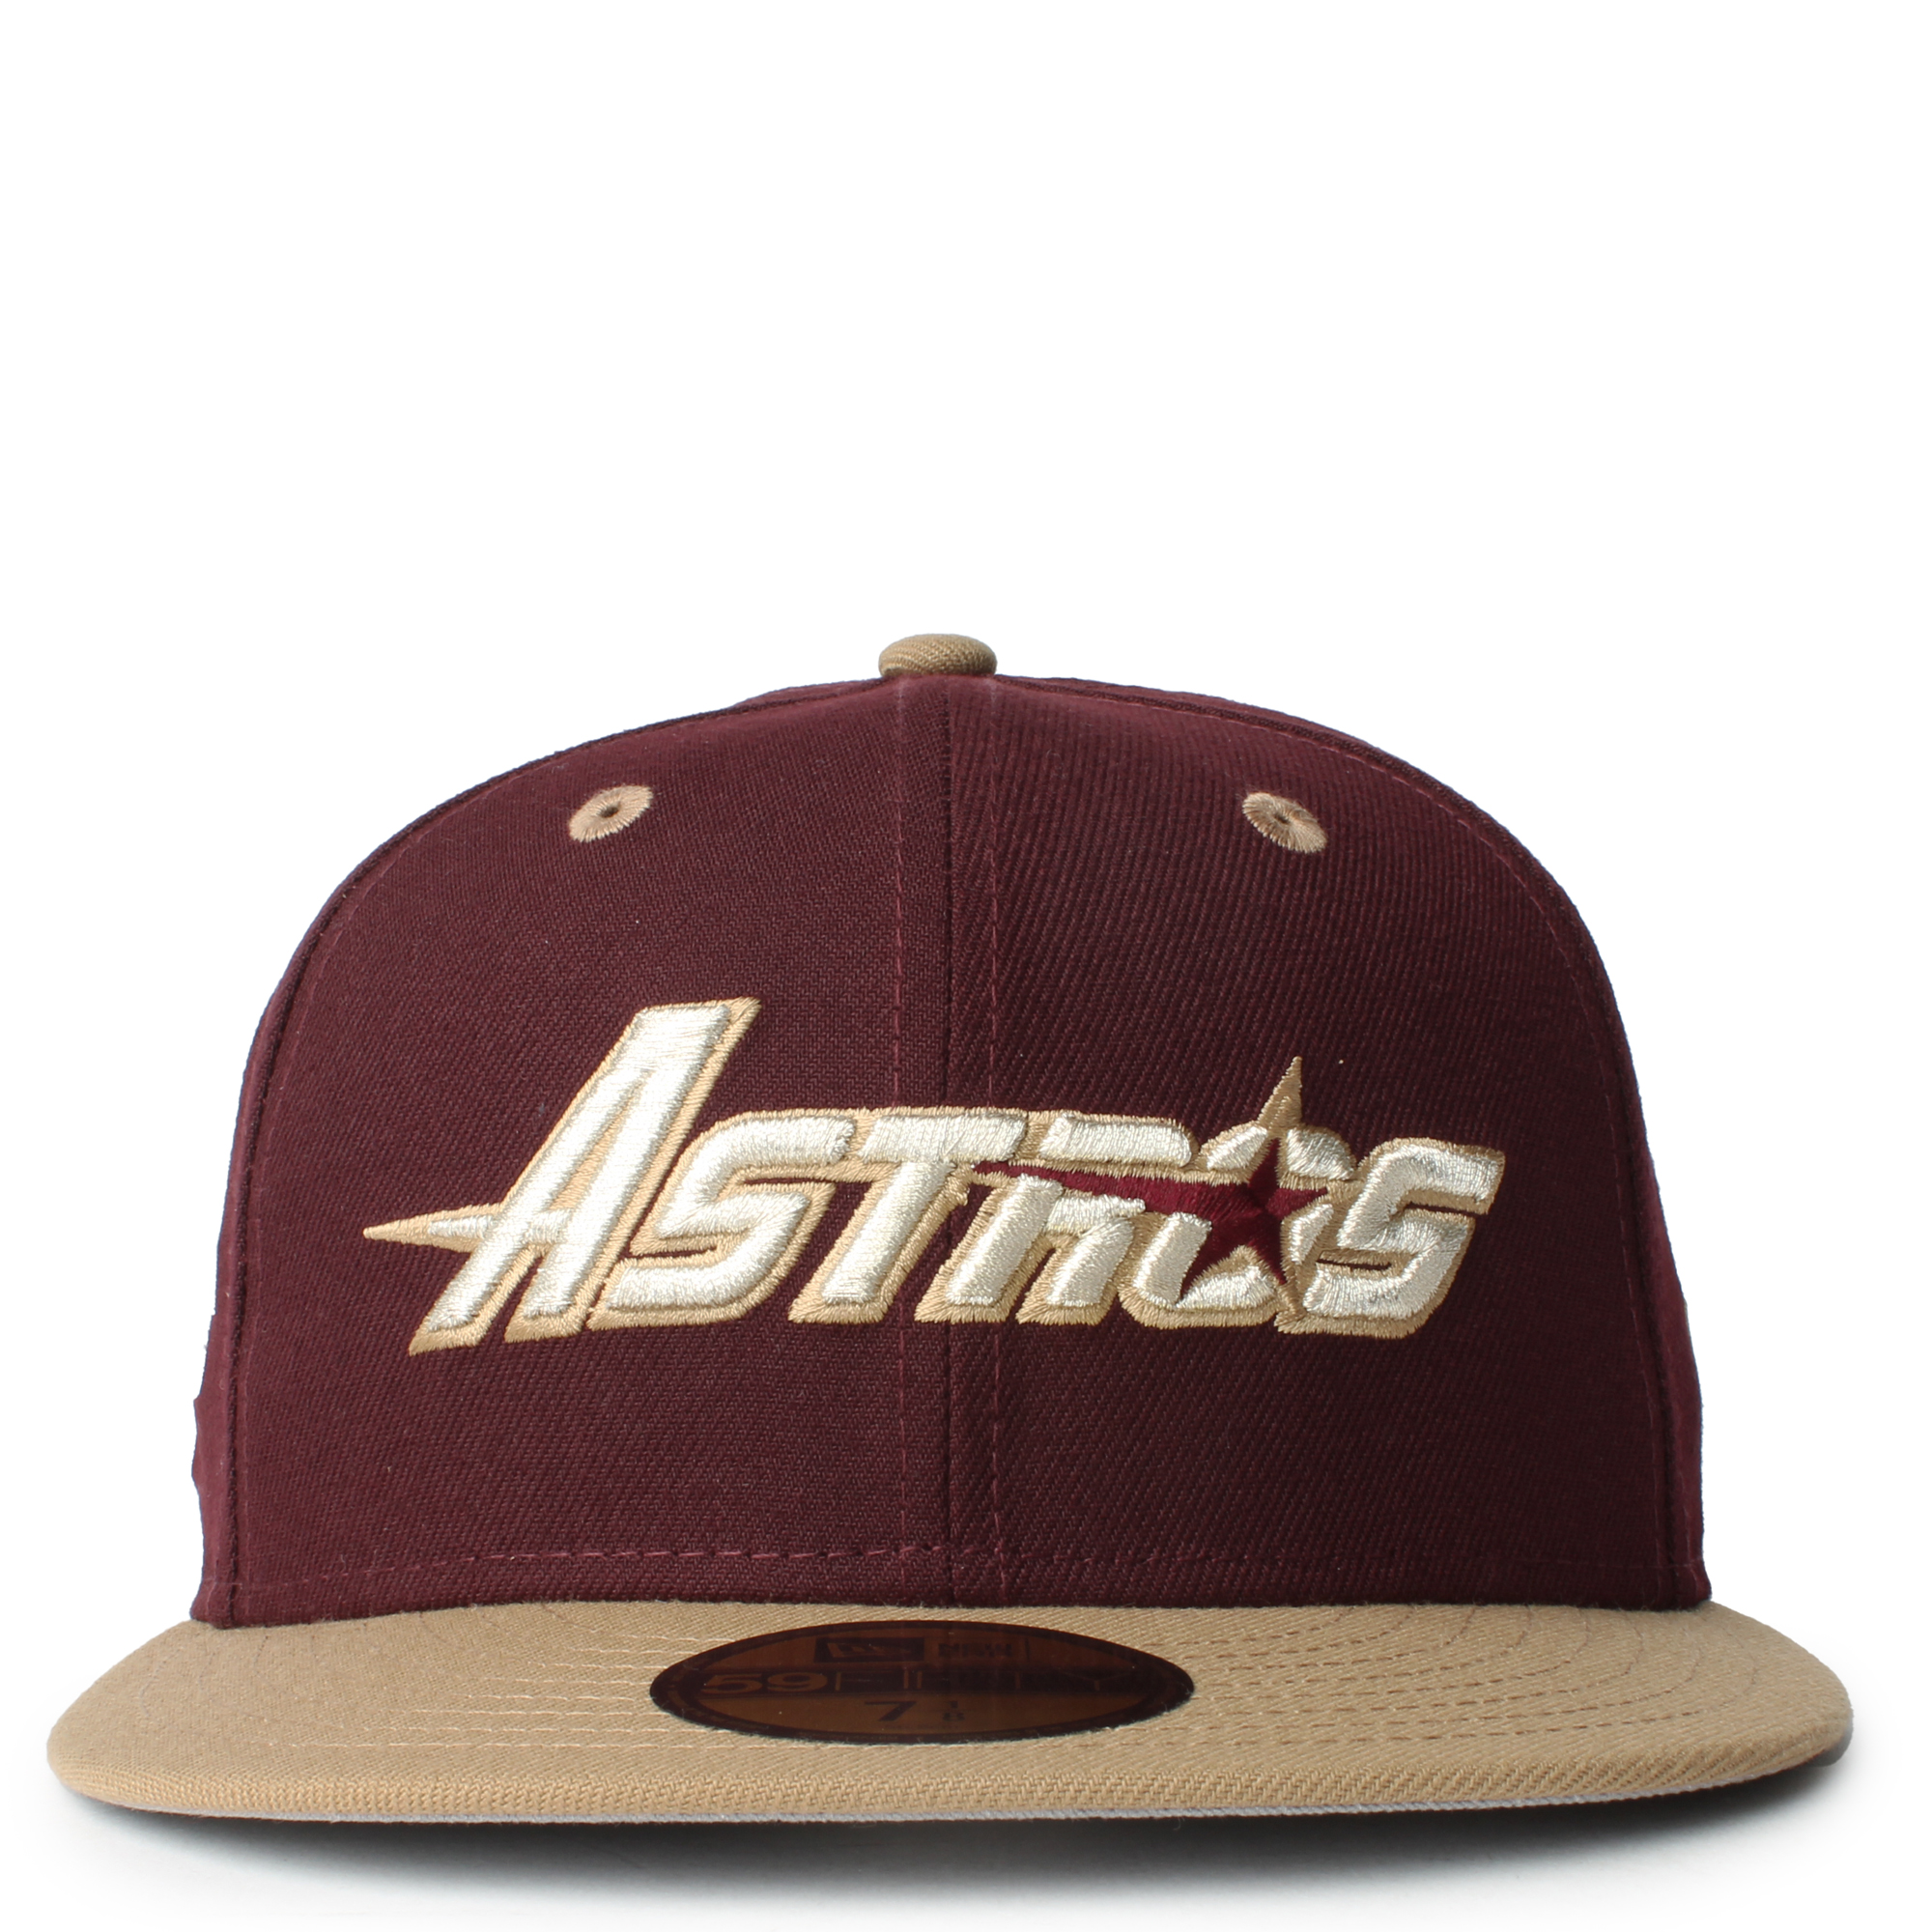 New Era Houston Astros 35 Years 59FIFTY Men's Fitted Hat Maroon-Baby Blue 70667634 (Size 7 5/8), Red